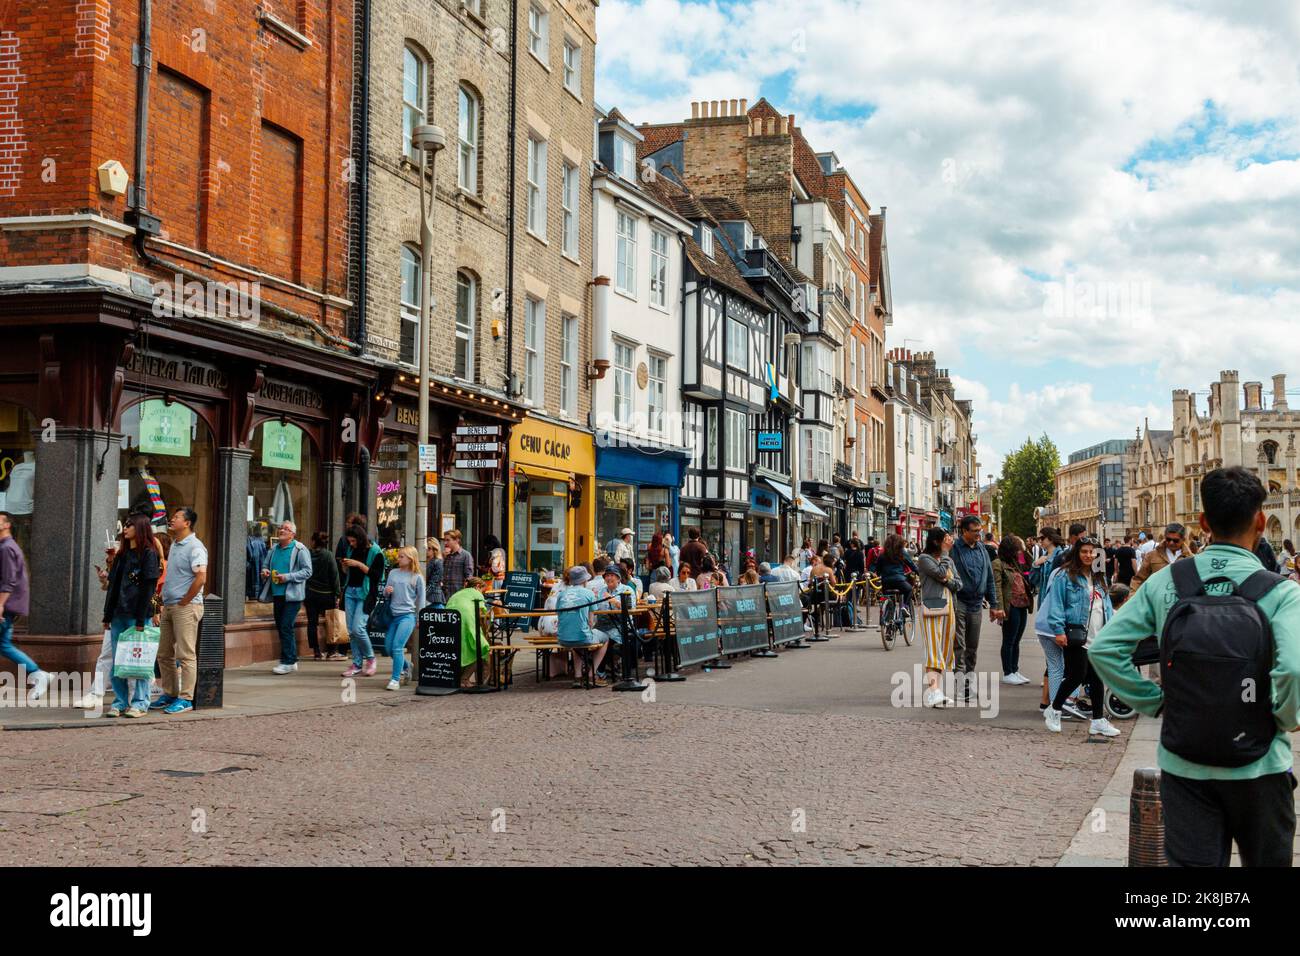 A view of Kings Parade, Cambridge, UK showing lots of tourists eating and drinking outdoors Benets cafe. Stock Photo